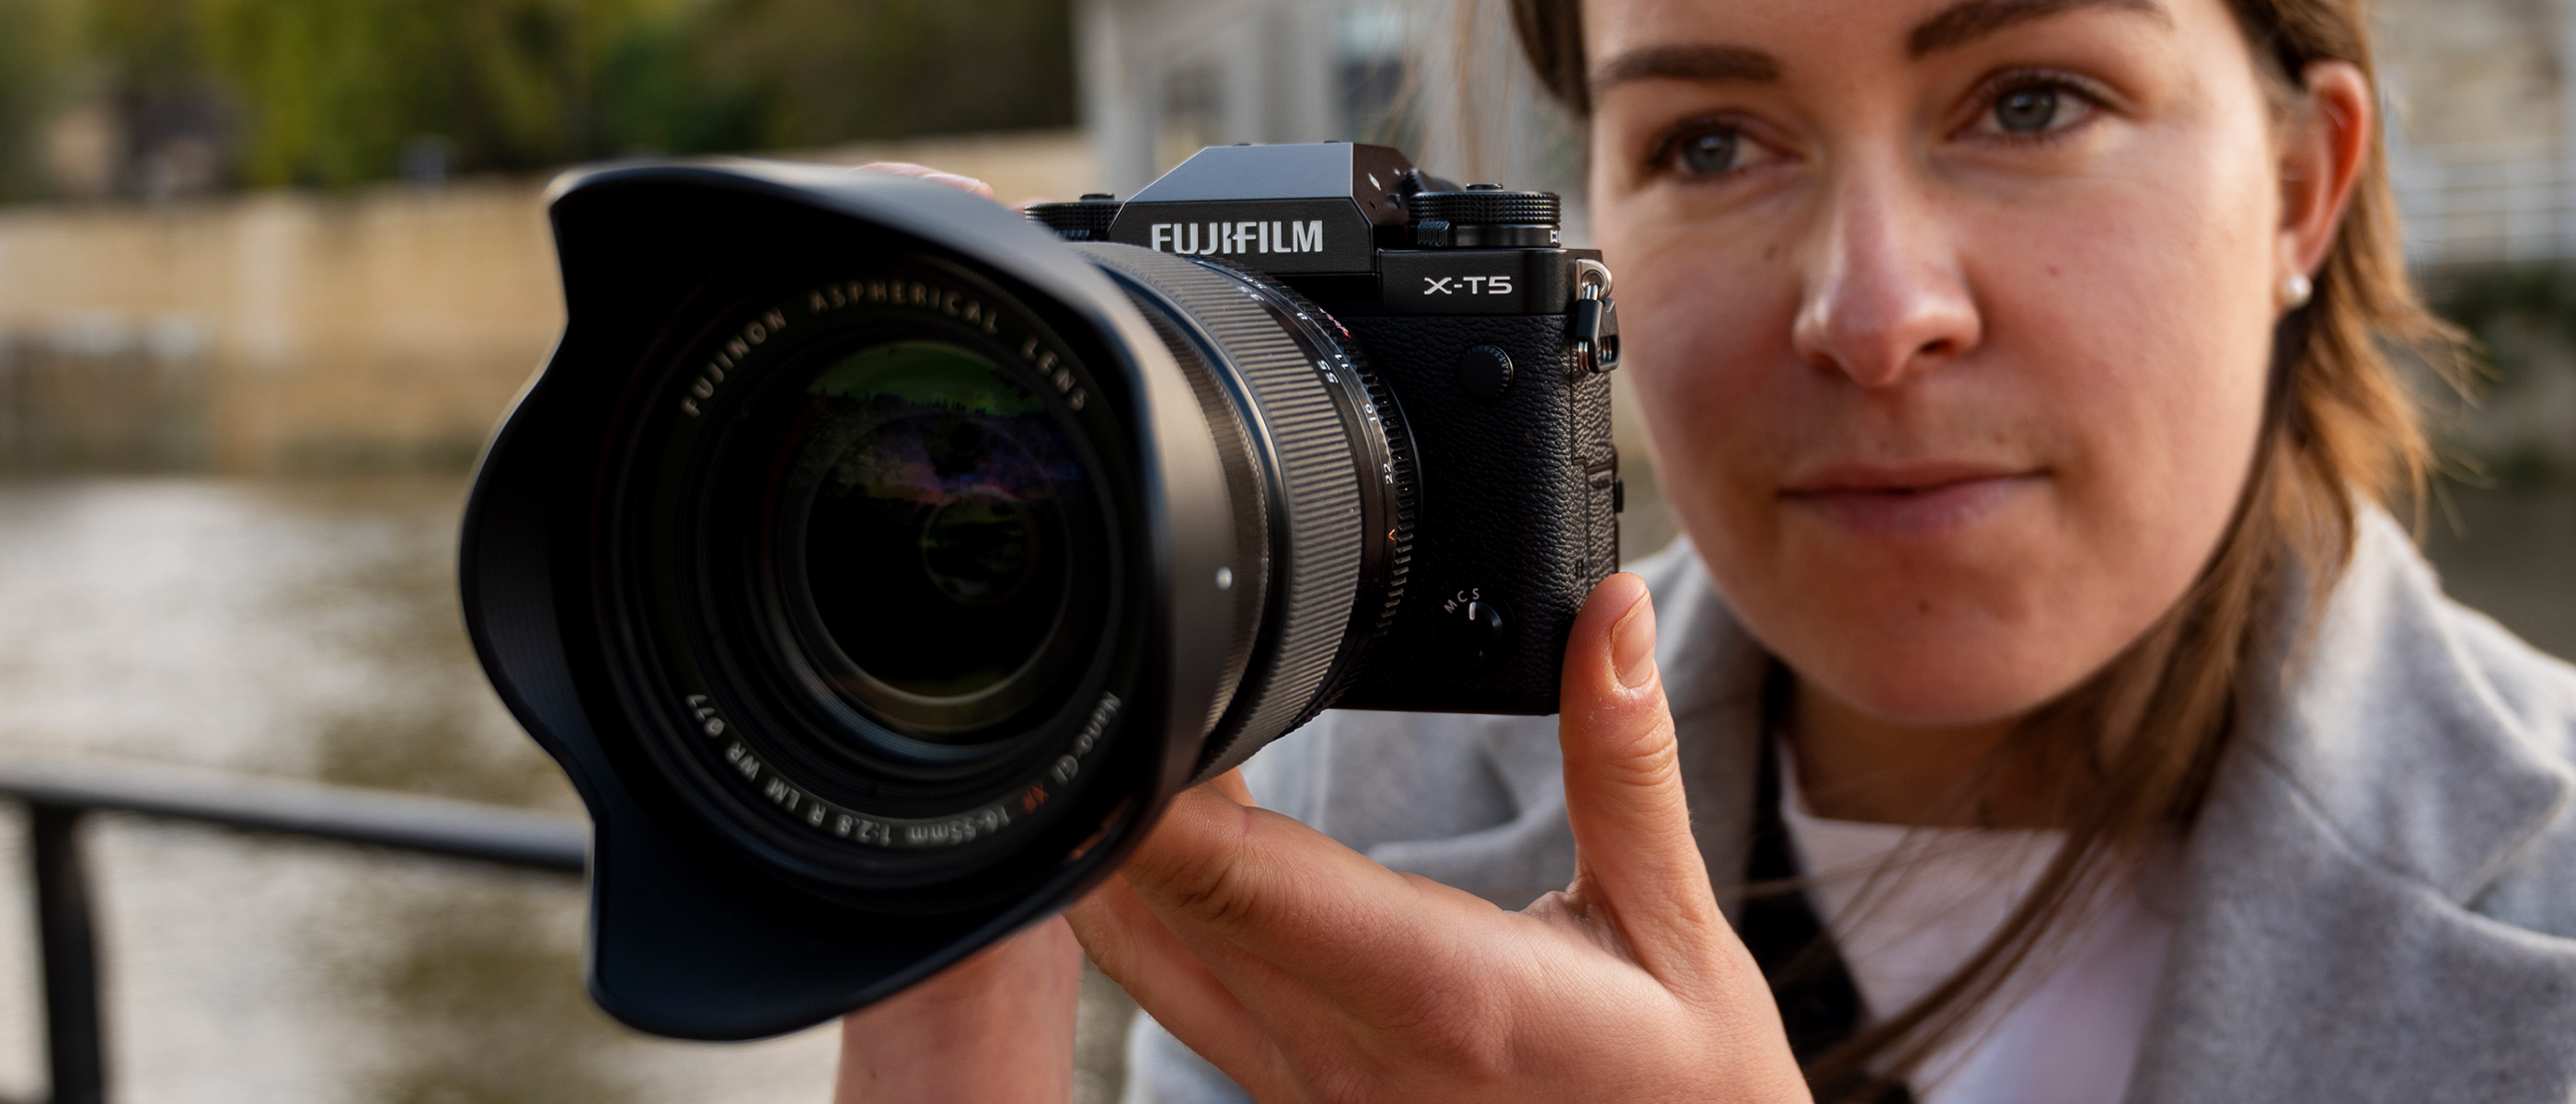 Fujifilm X-T5 in-hand with author